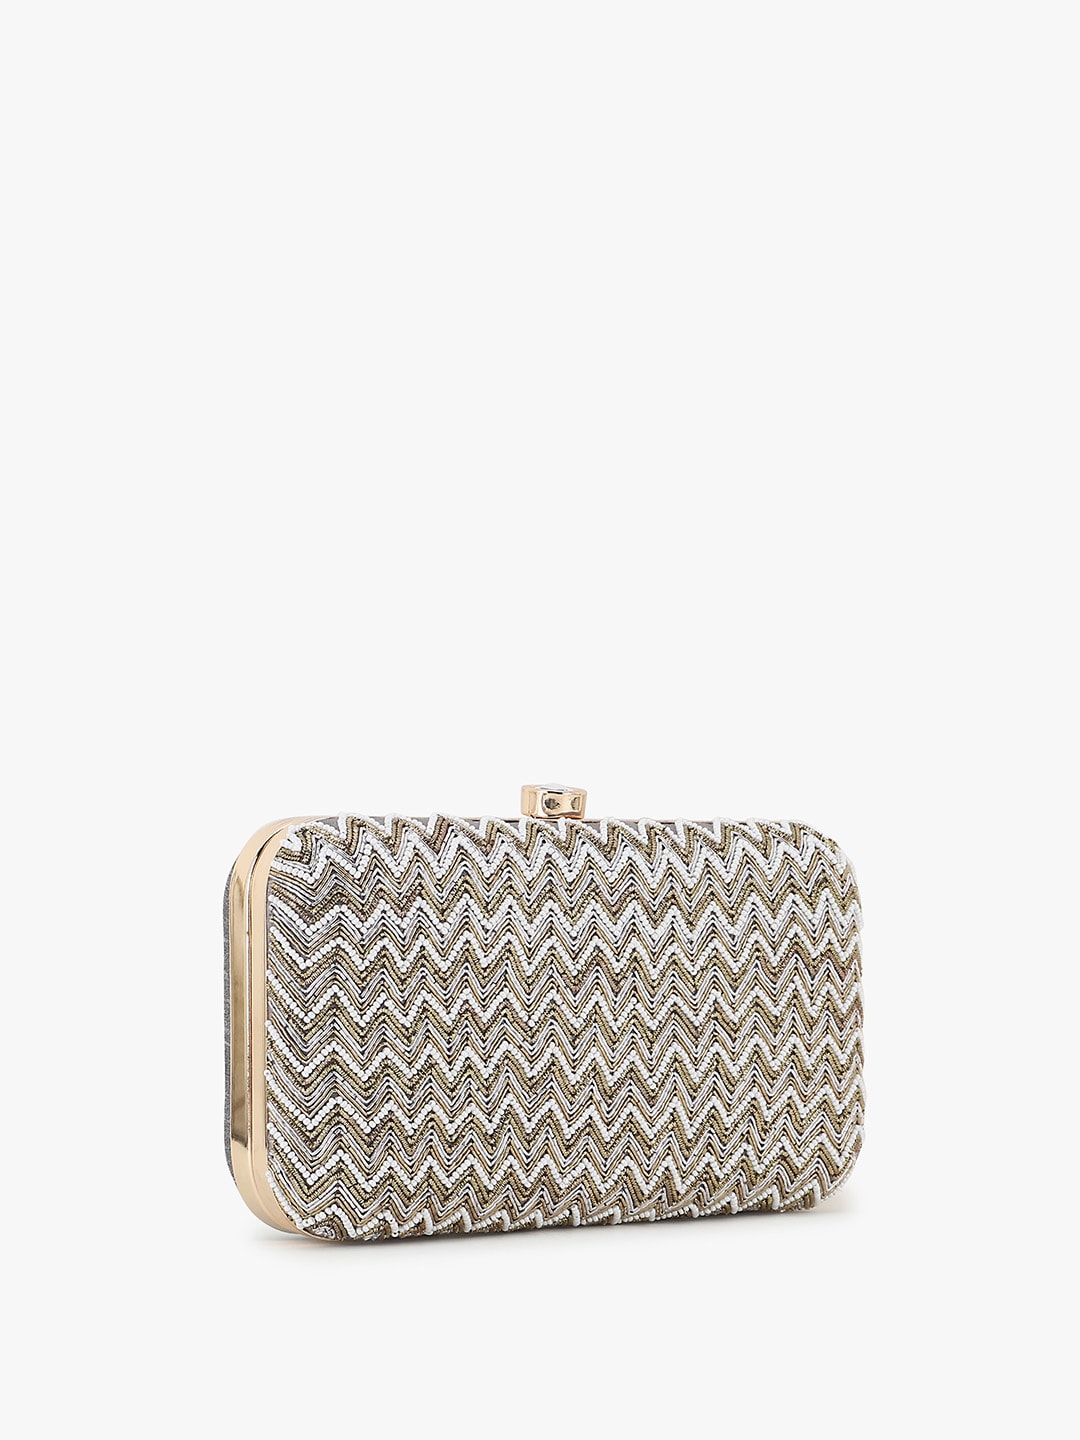 Anekaant Grey & White Embellished Purse Clutch - Distacart